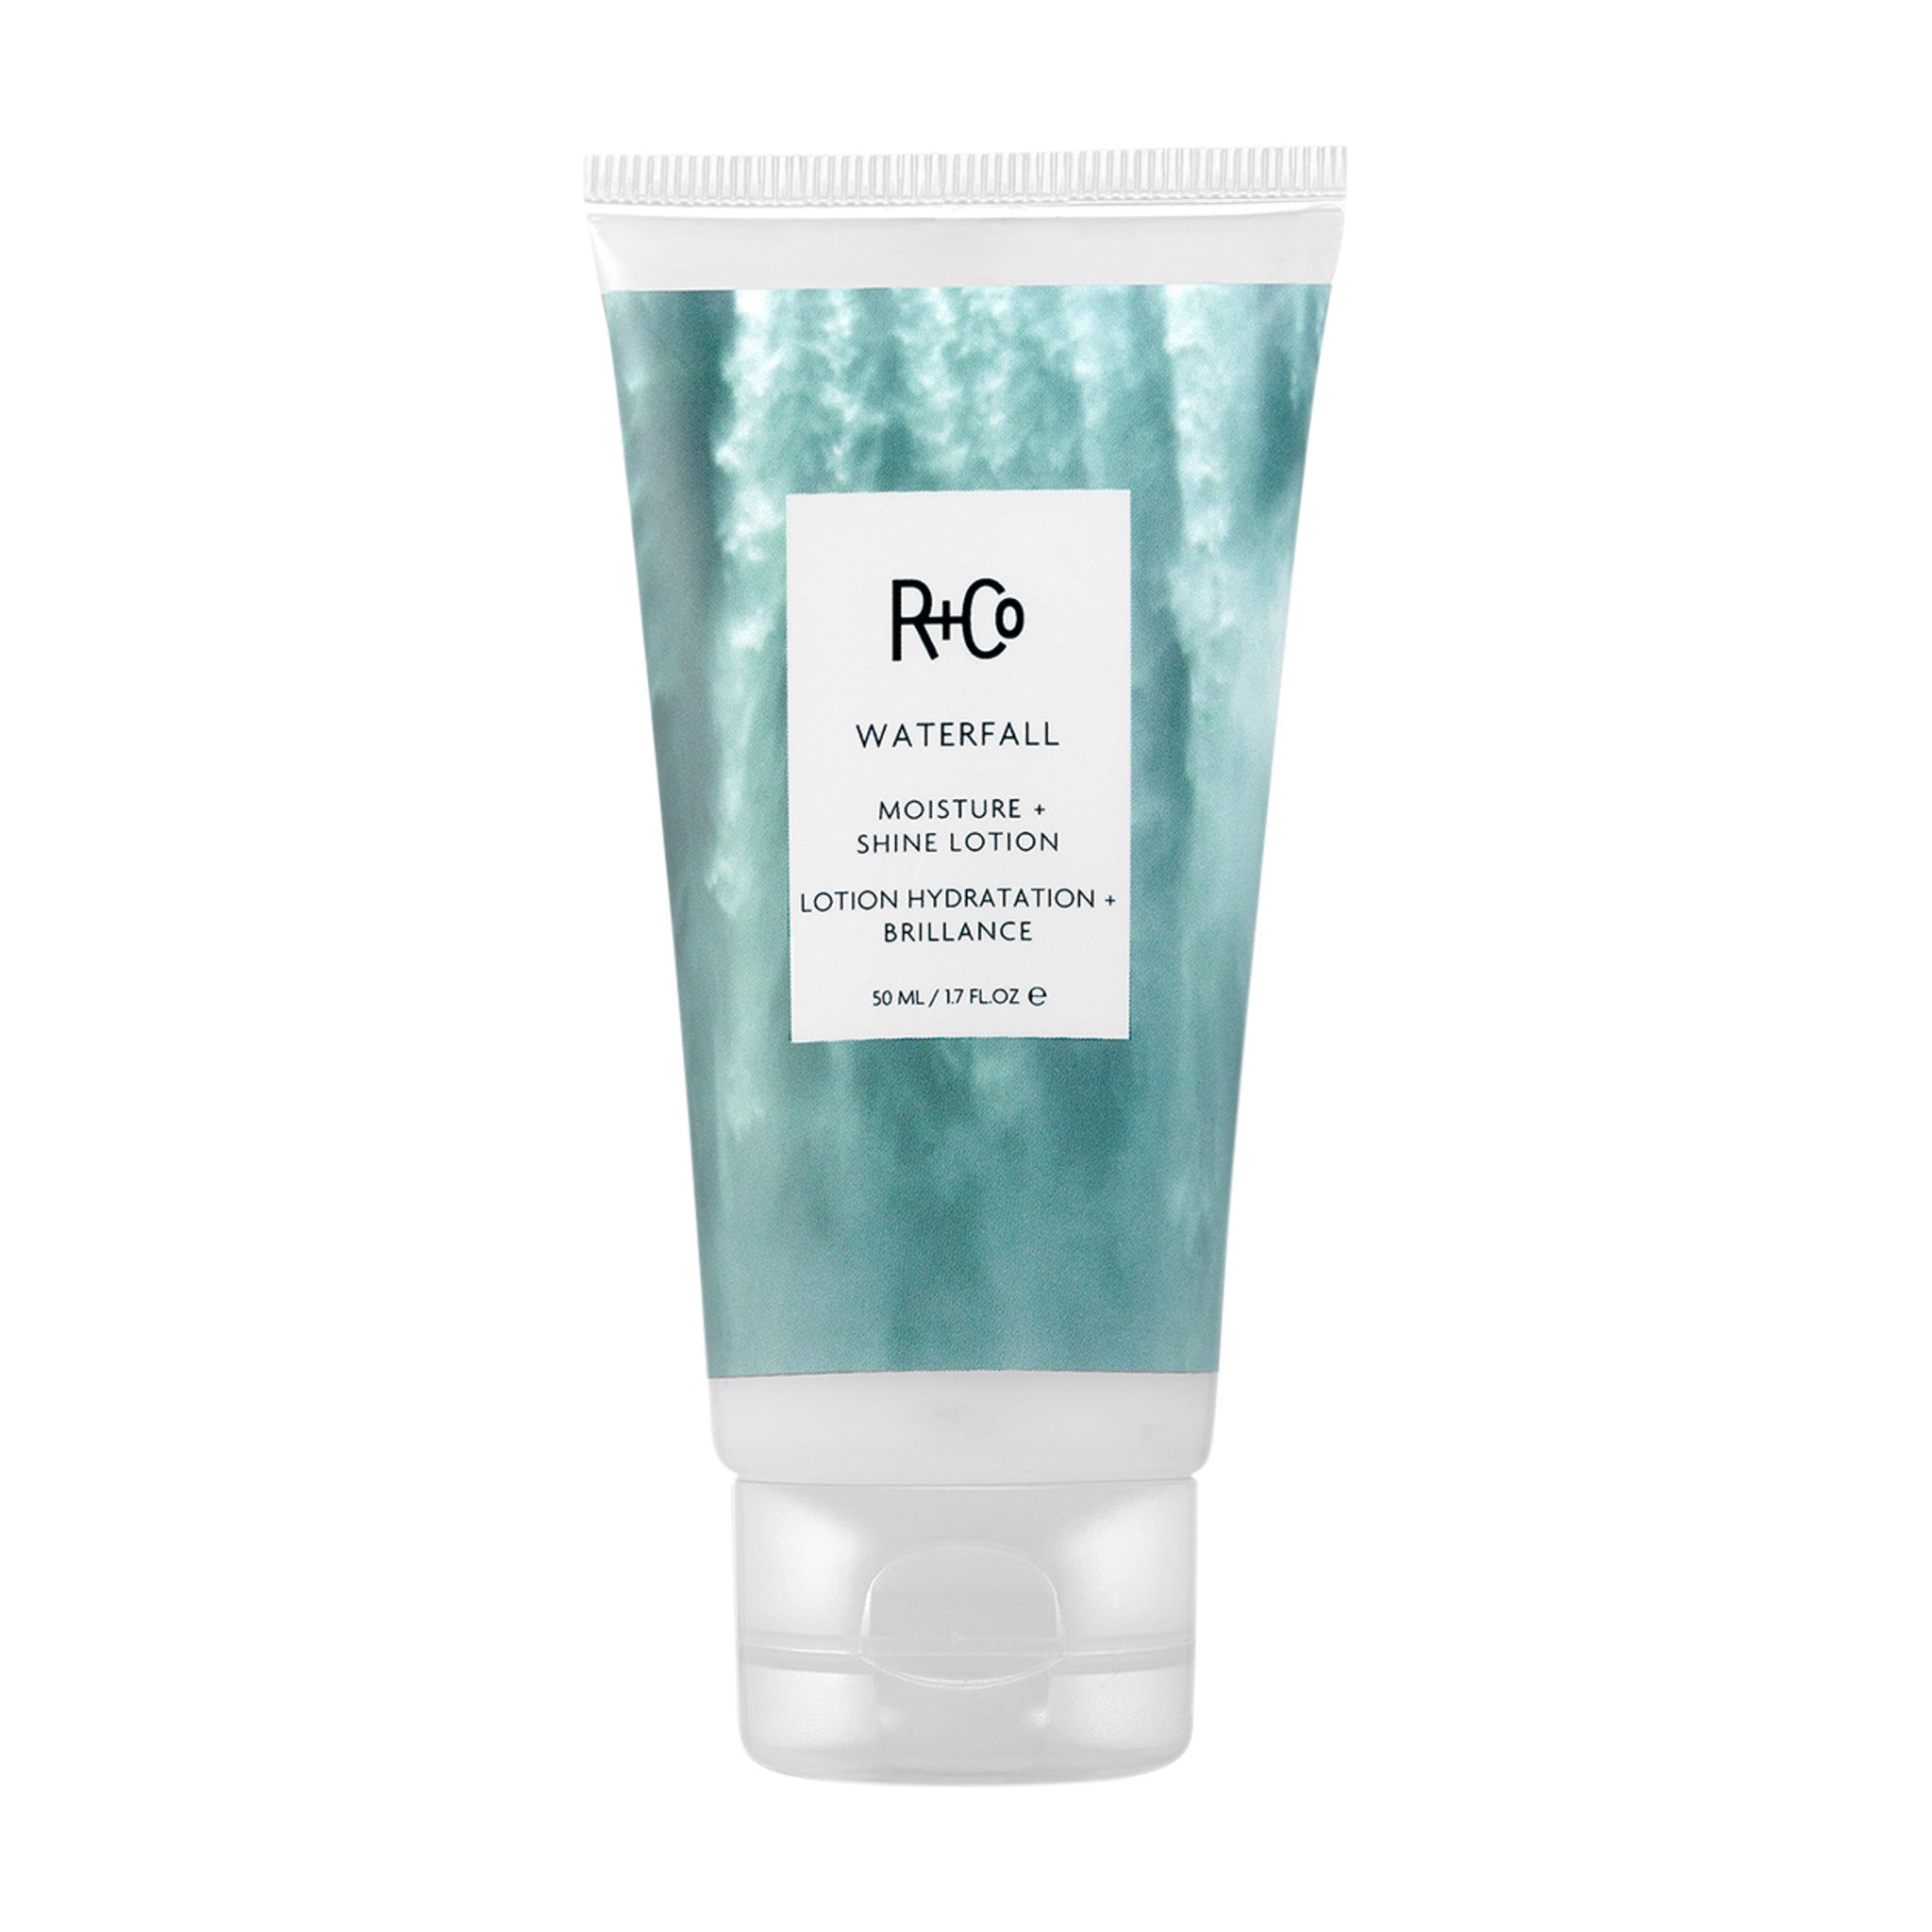 R+Co Waterfall Moisture and Shine Lotion Size variant: 1.7 oz main image.